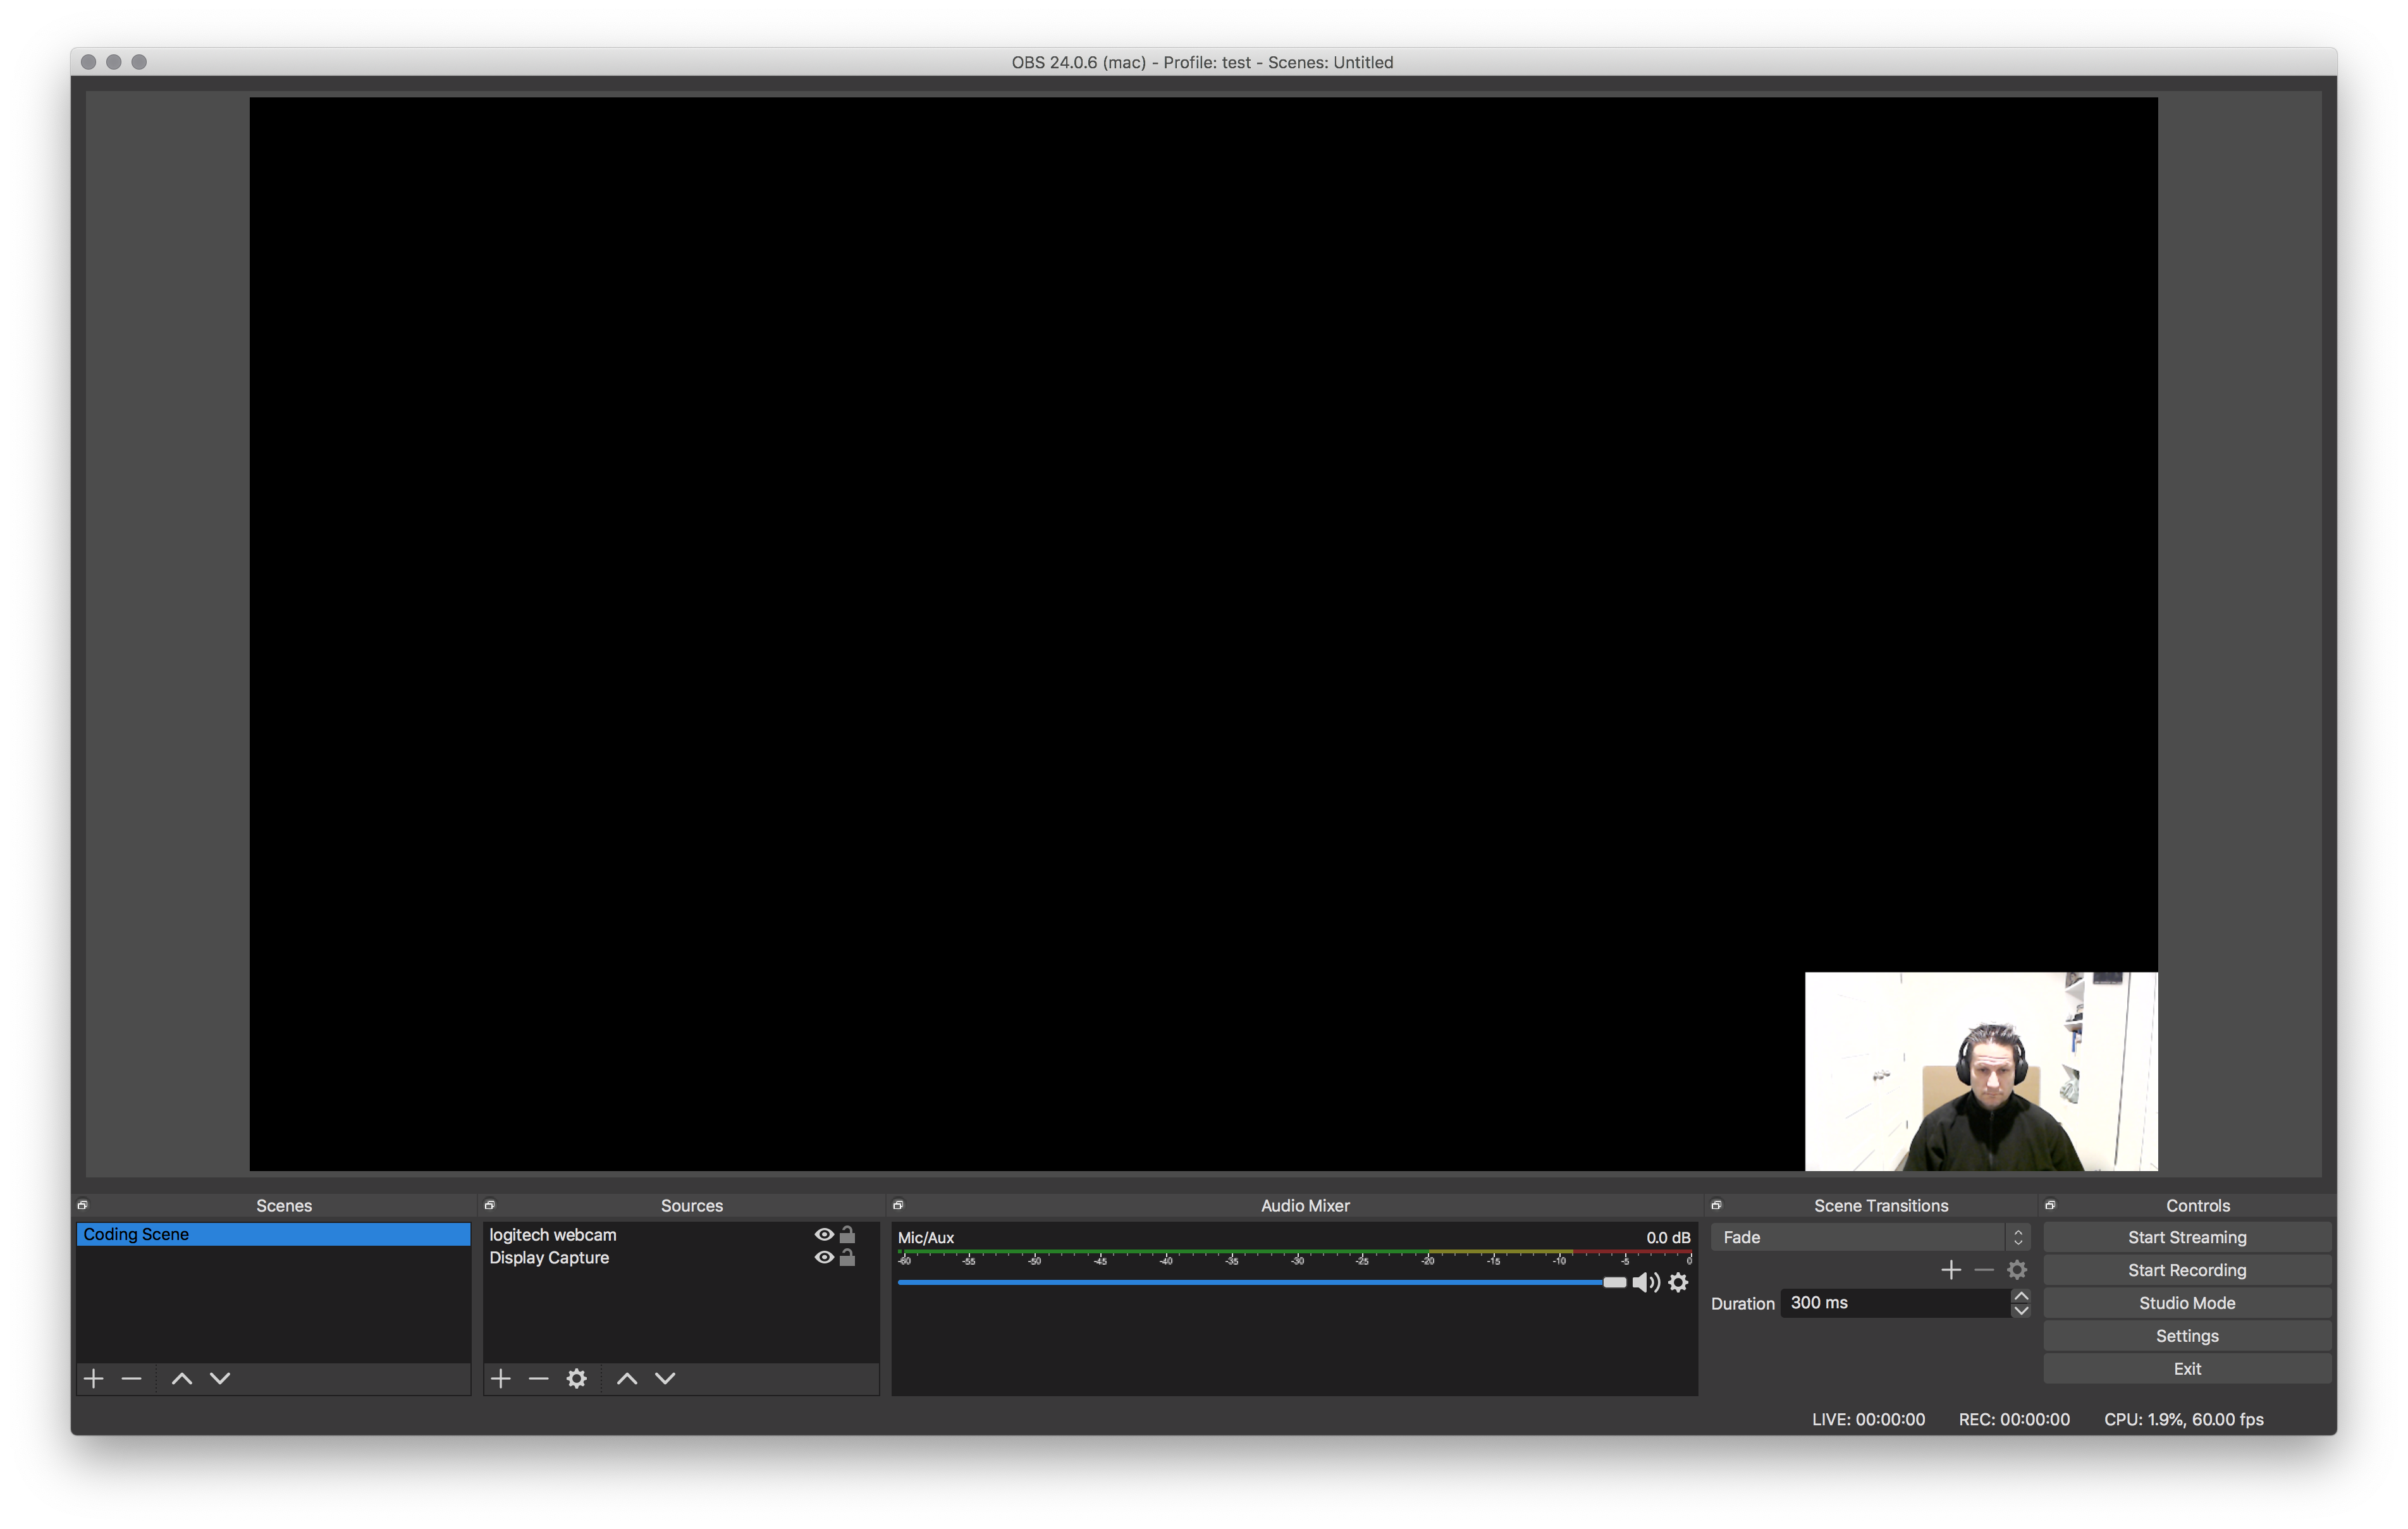 OBS display source showing a black screen